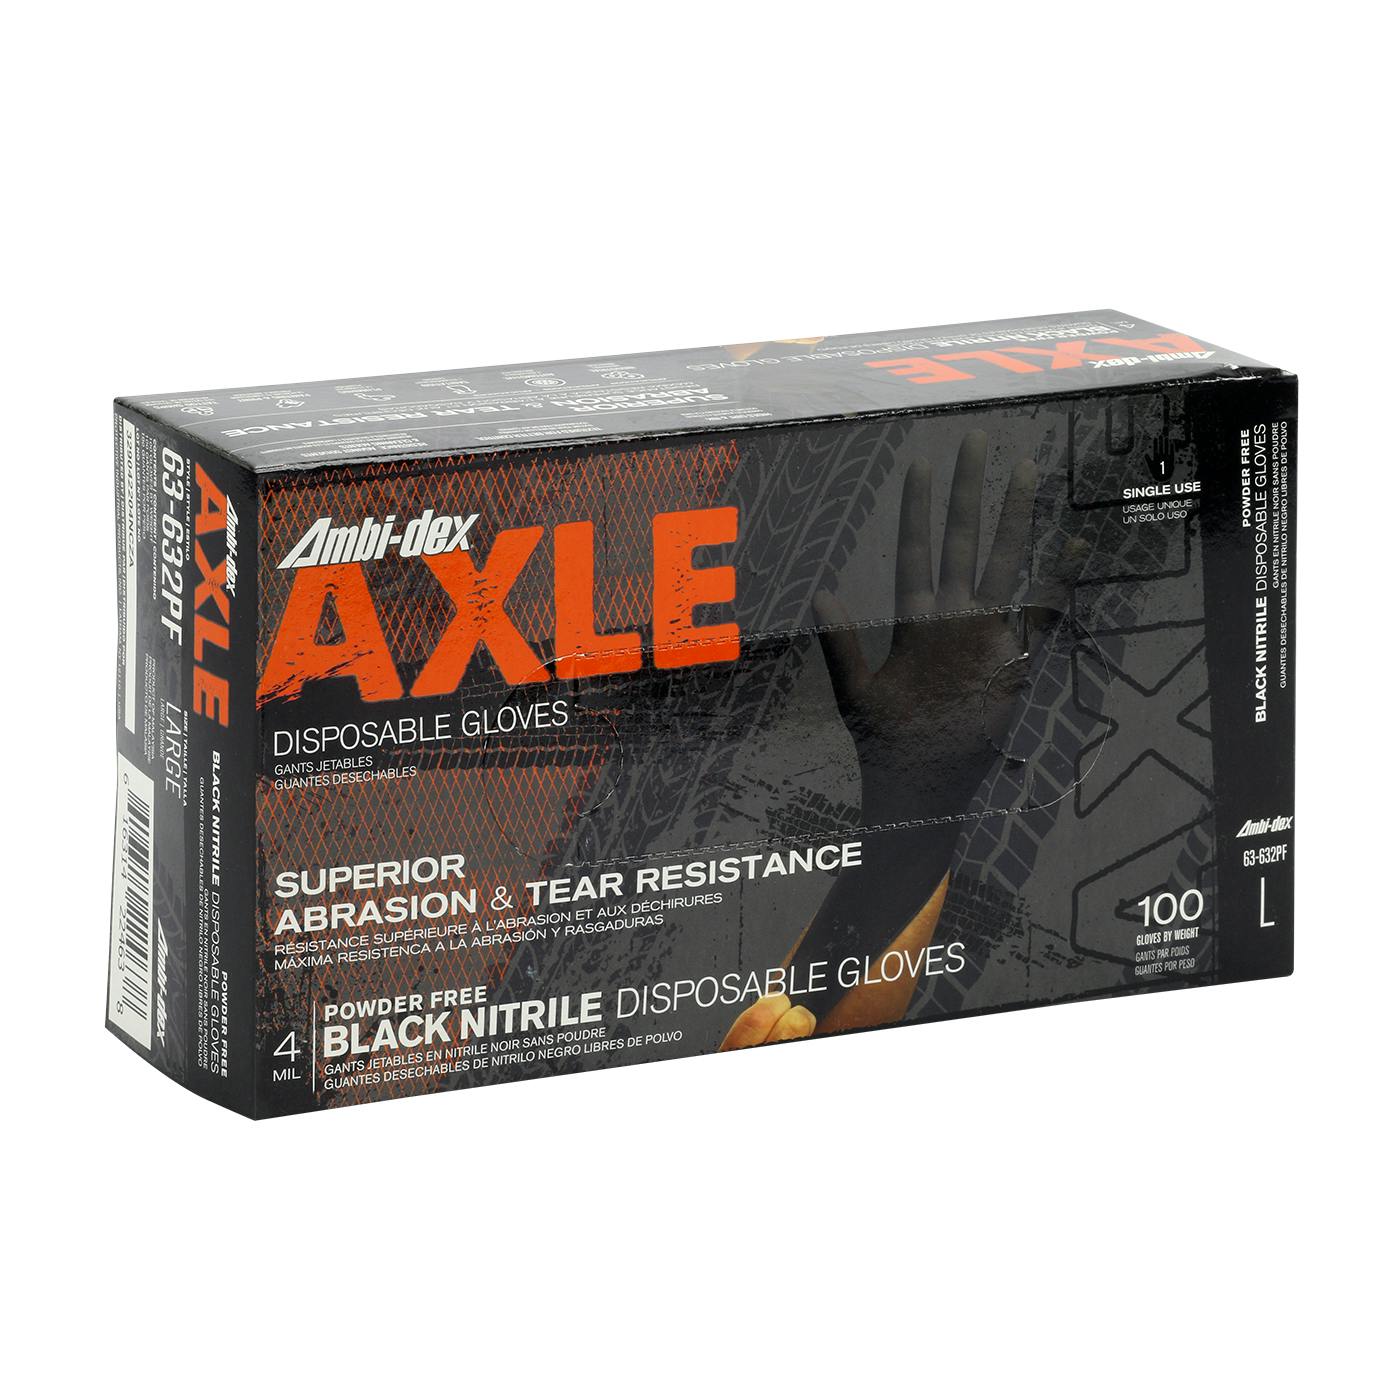 Ambi-dex® Axle Disposable Nitrile Glove, Powder Free with Textured Grip - 4 mil (63-632PF)